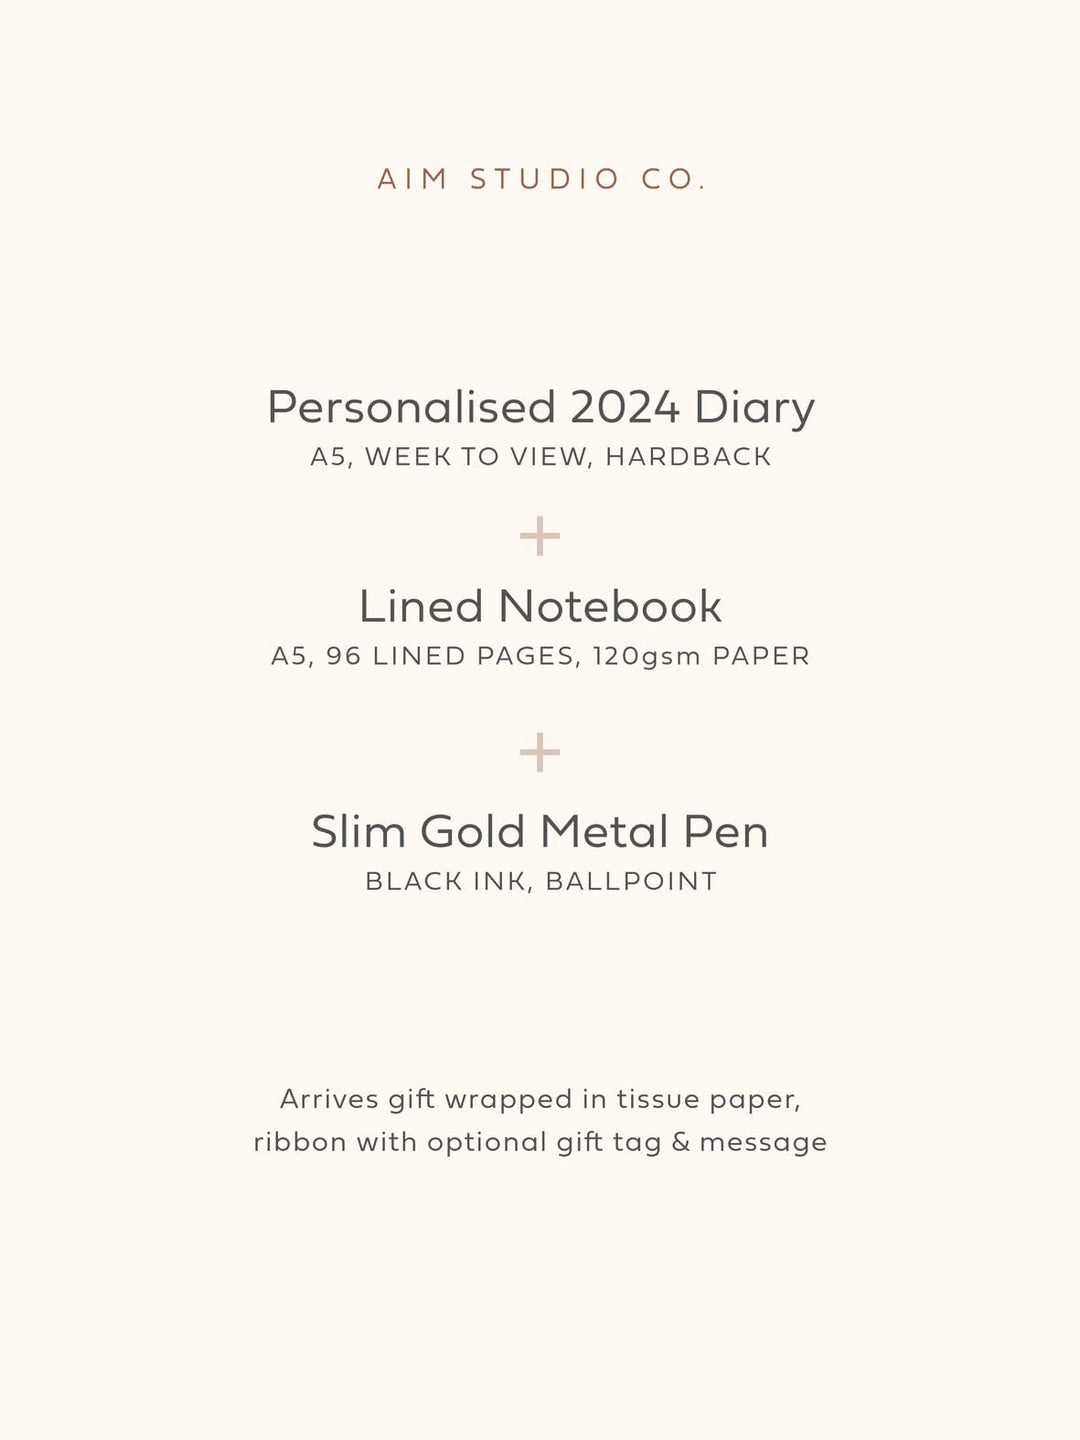 2024 Pink Personalised Letterbox Gift Bundle | Diary, Notebook & Pen Set